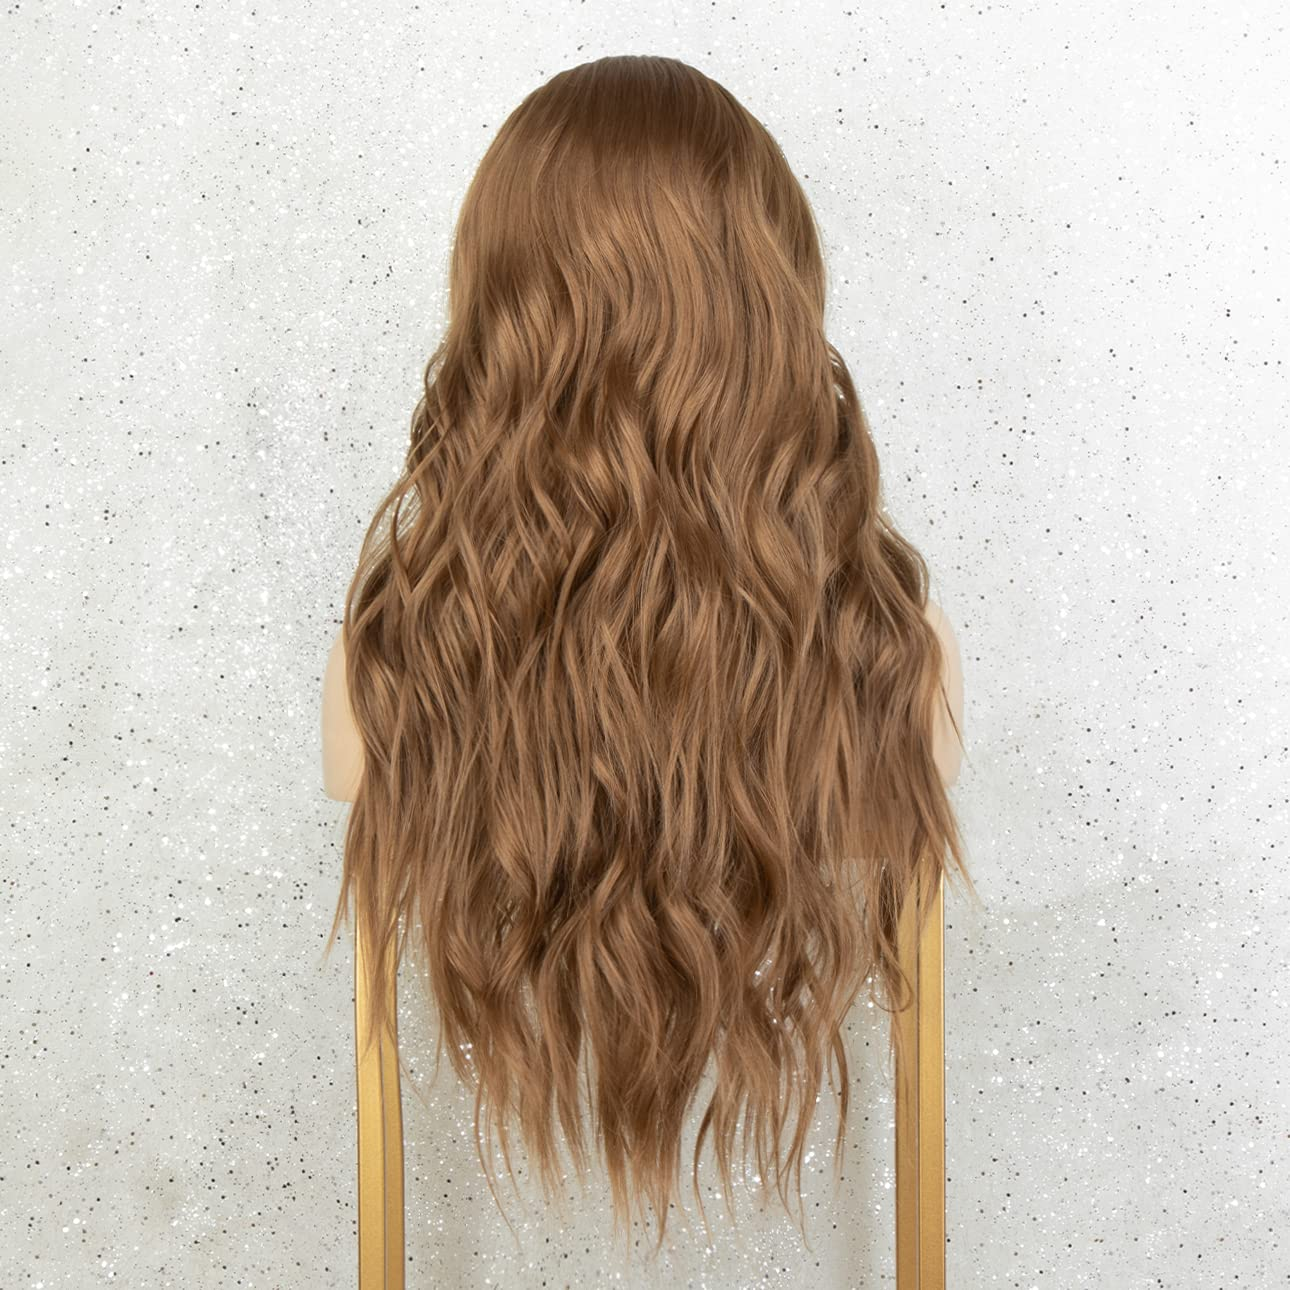  Golden Brown  22 inches Wavy Long Lace Front Wig